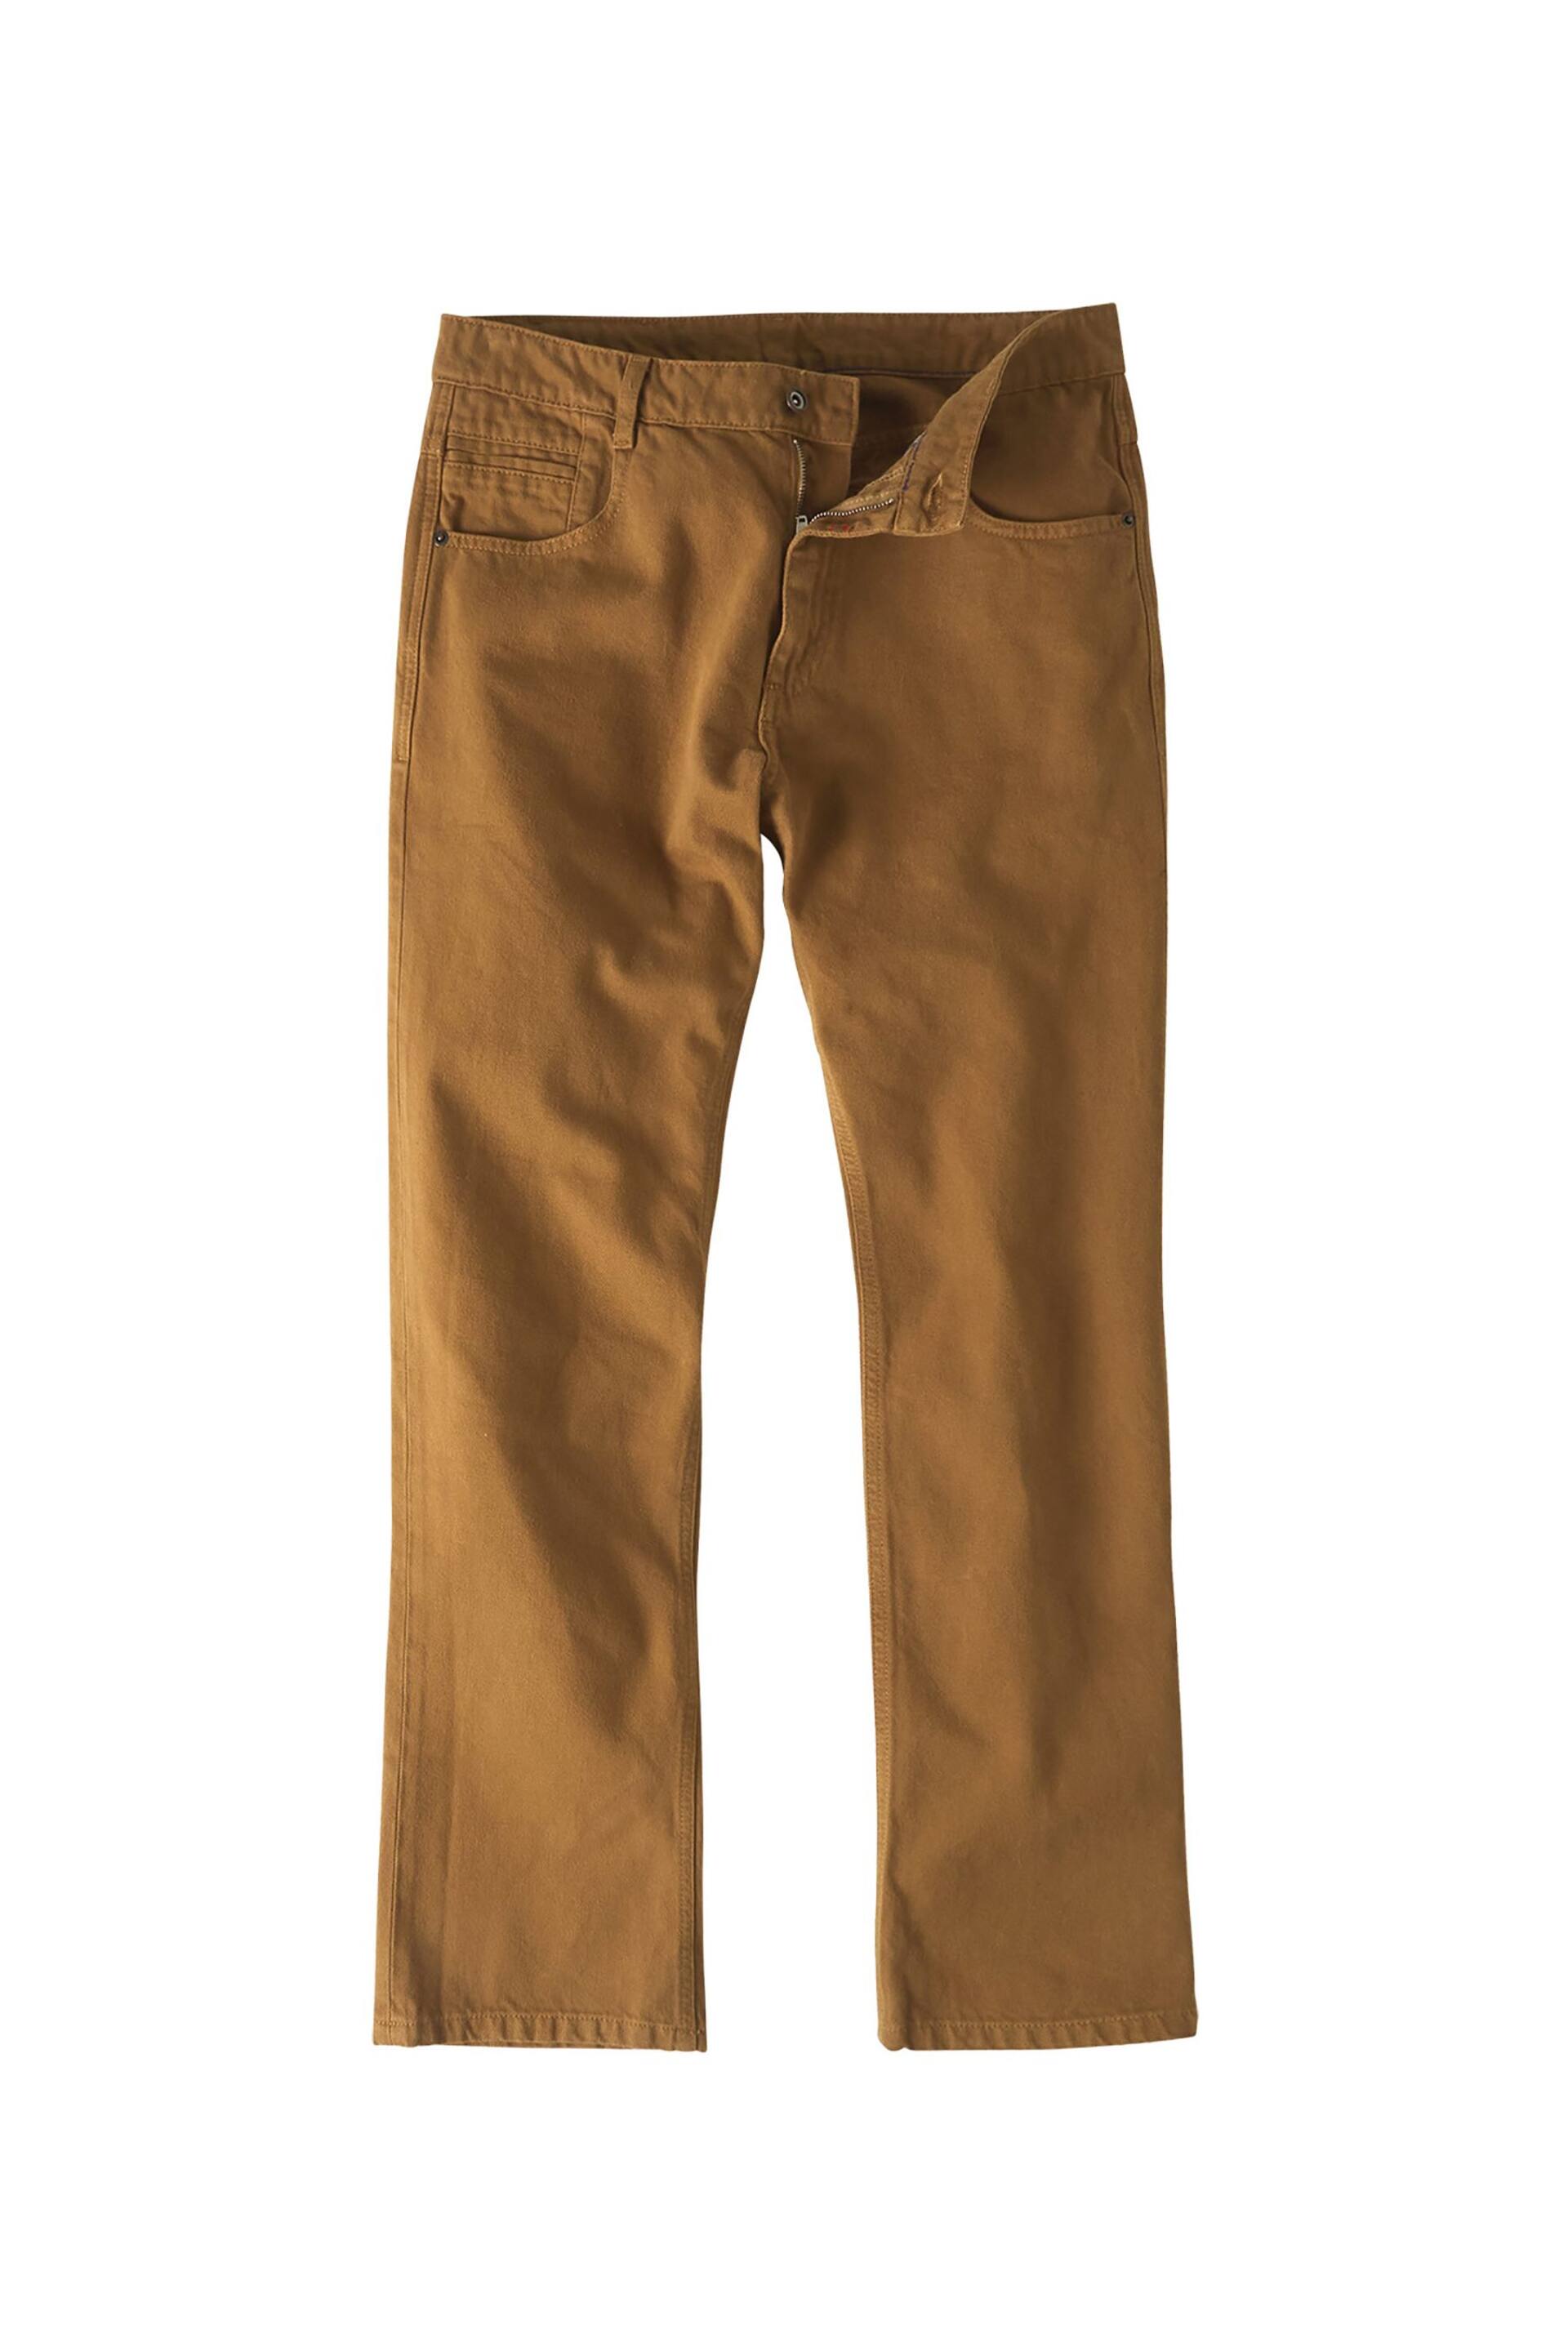 Joe Browns Brown Standout Coloured Denim Jean Trousers - Image 5 of 5